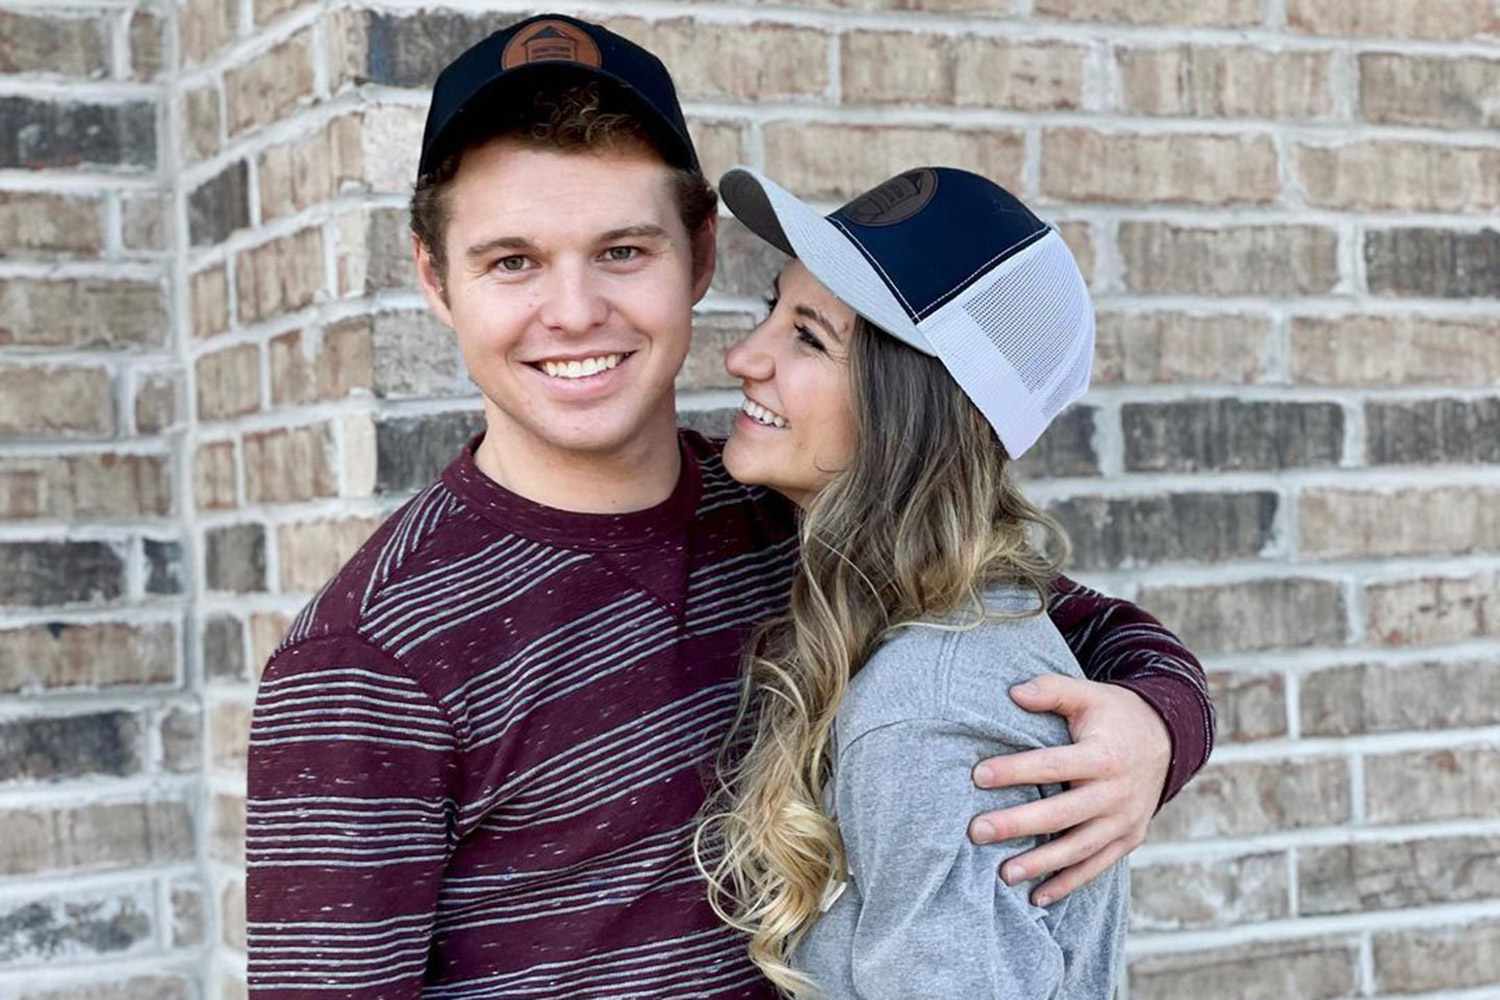 Duggar Family Reacts to Jeremiah Duggar's Engagement to Hannah Wissmann: 'So Happy for These Two'